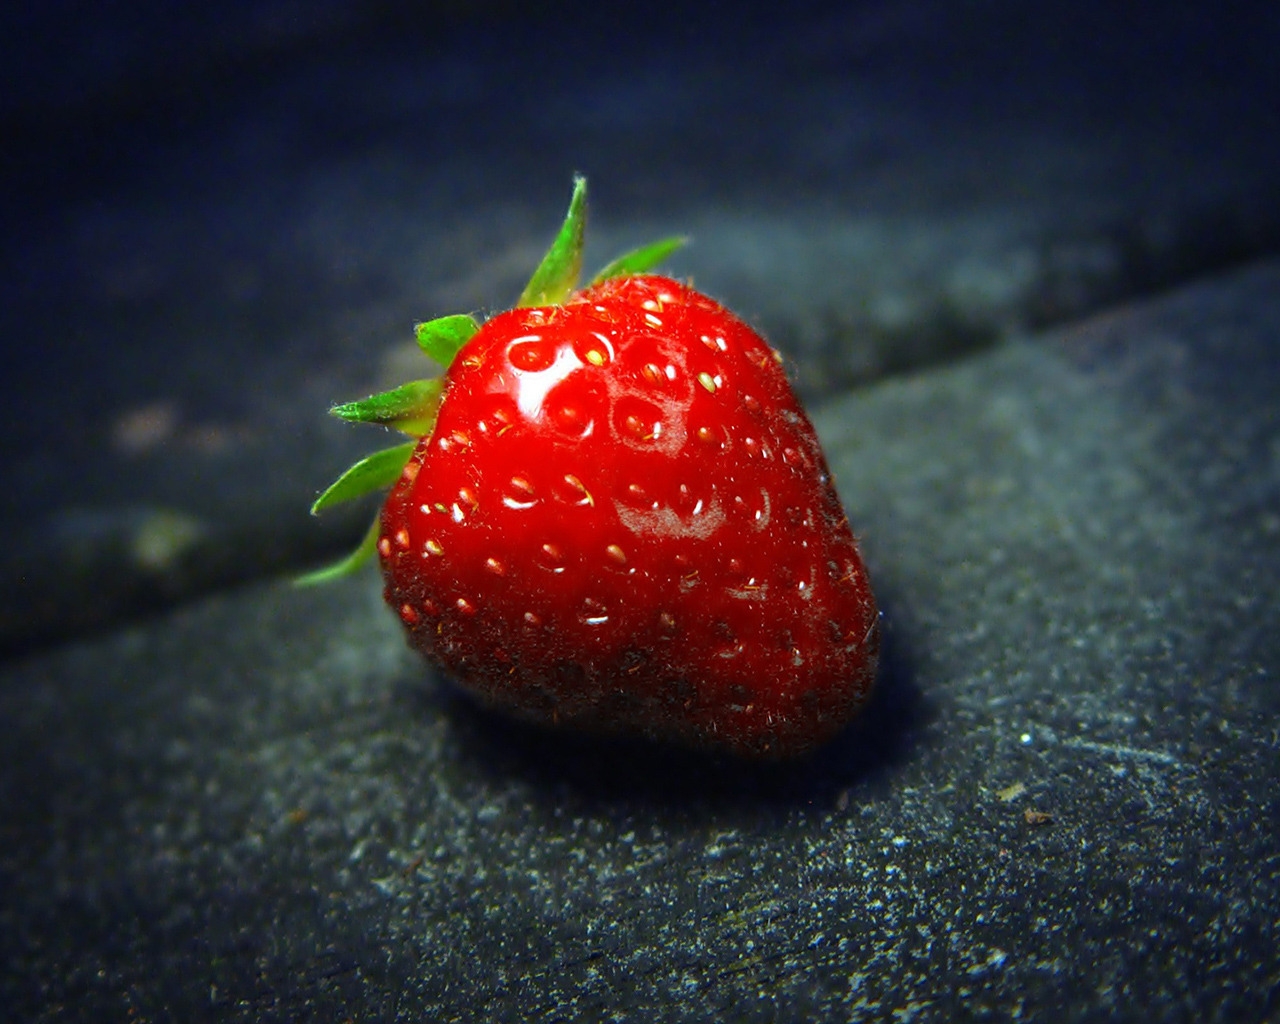 The Strawberry for 1280 x 1024 resolution